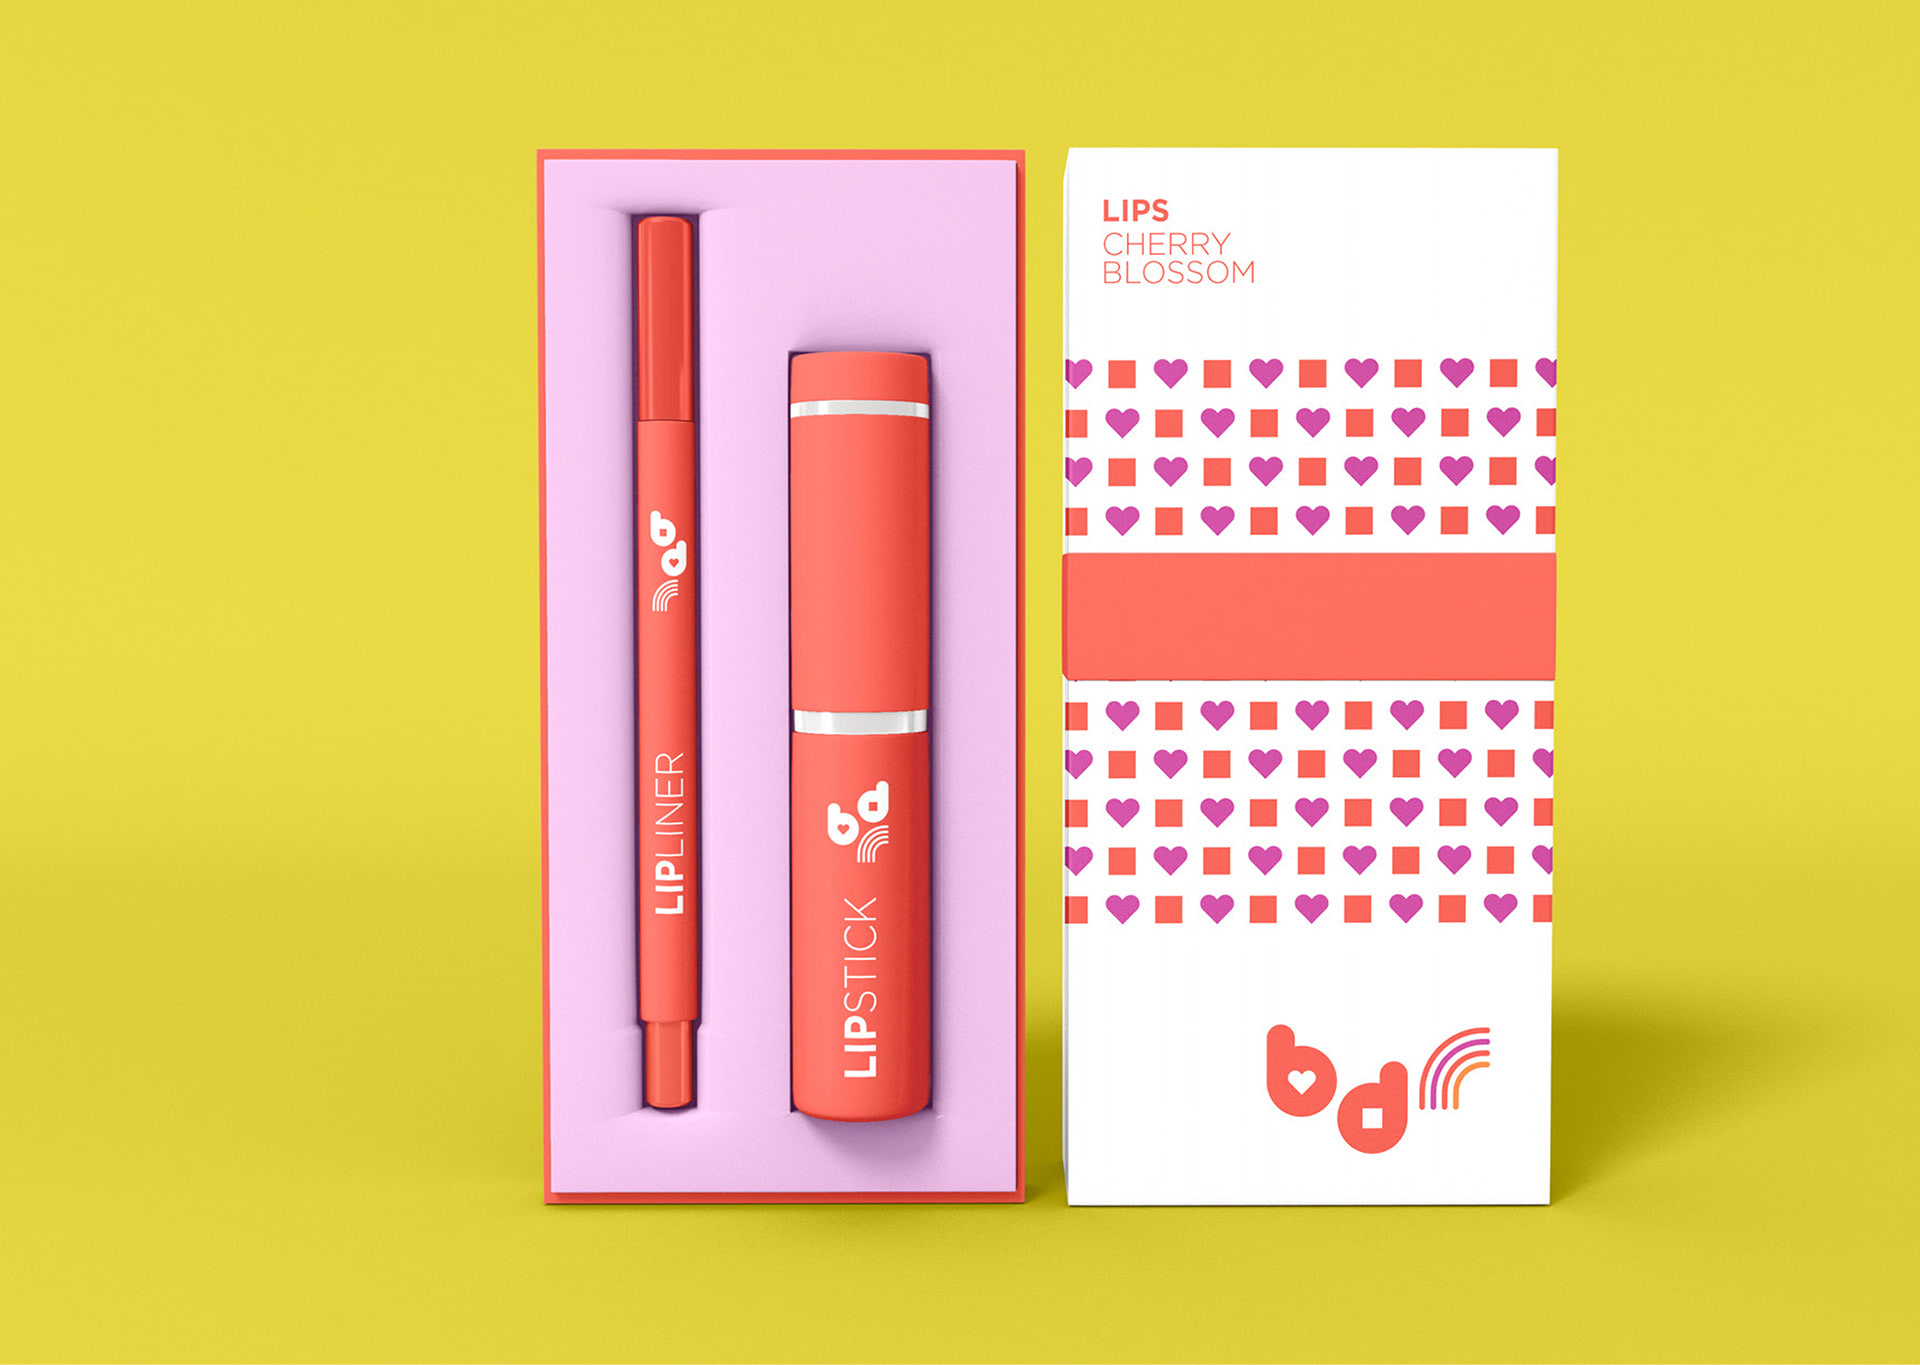 BDR Application of brand elements and logo to beauty and makeup packaging design